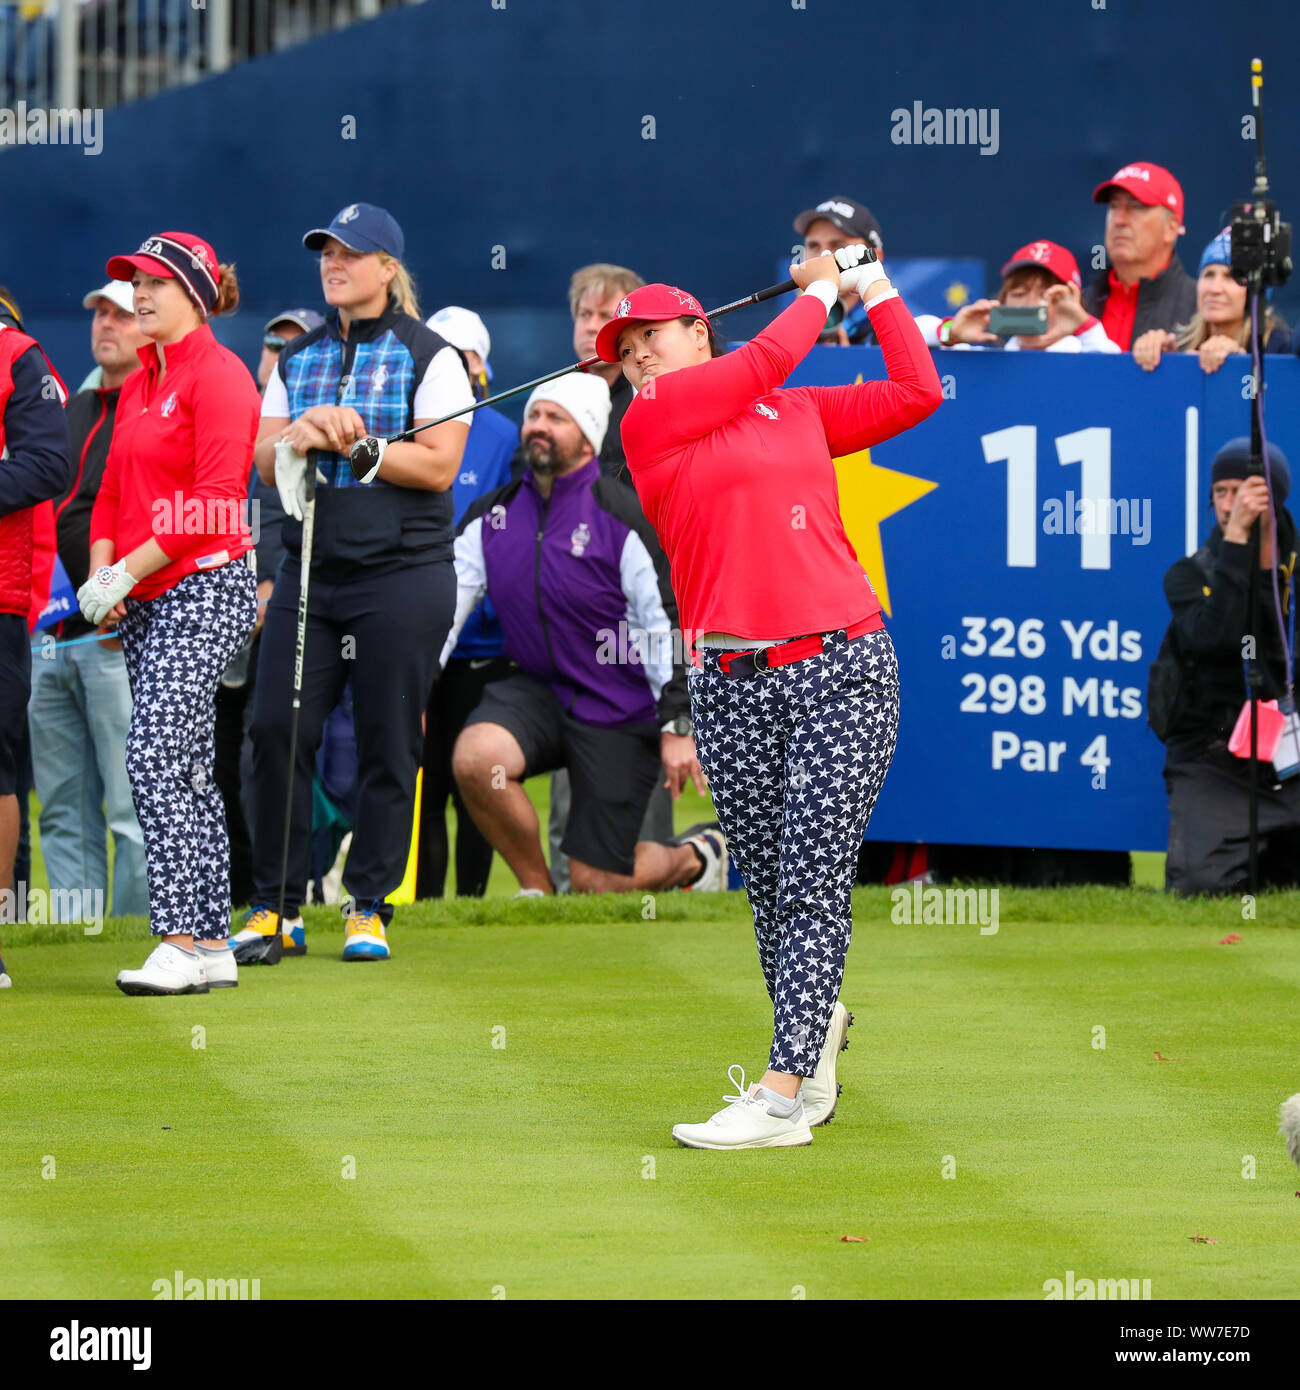 Gleneagles, UK. 13th Sep, 2019. ANNA NORDQVIST and CAROLINE HEDWALL (Europe) played against ALLY McDONALD and ANGEL YIN (USA) over the PGA Centenary course at Gleneagles in the Friday afternoon 'fourballs. The game finished on the 13th when USA - McDonald and Yin -won by 7 and 5. Angel Yin teeing off at the 11th tee.Credit: Findlay/Alamy Live News Stock Photo